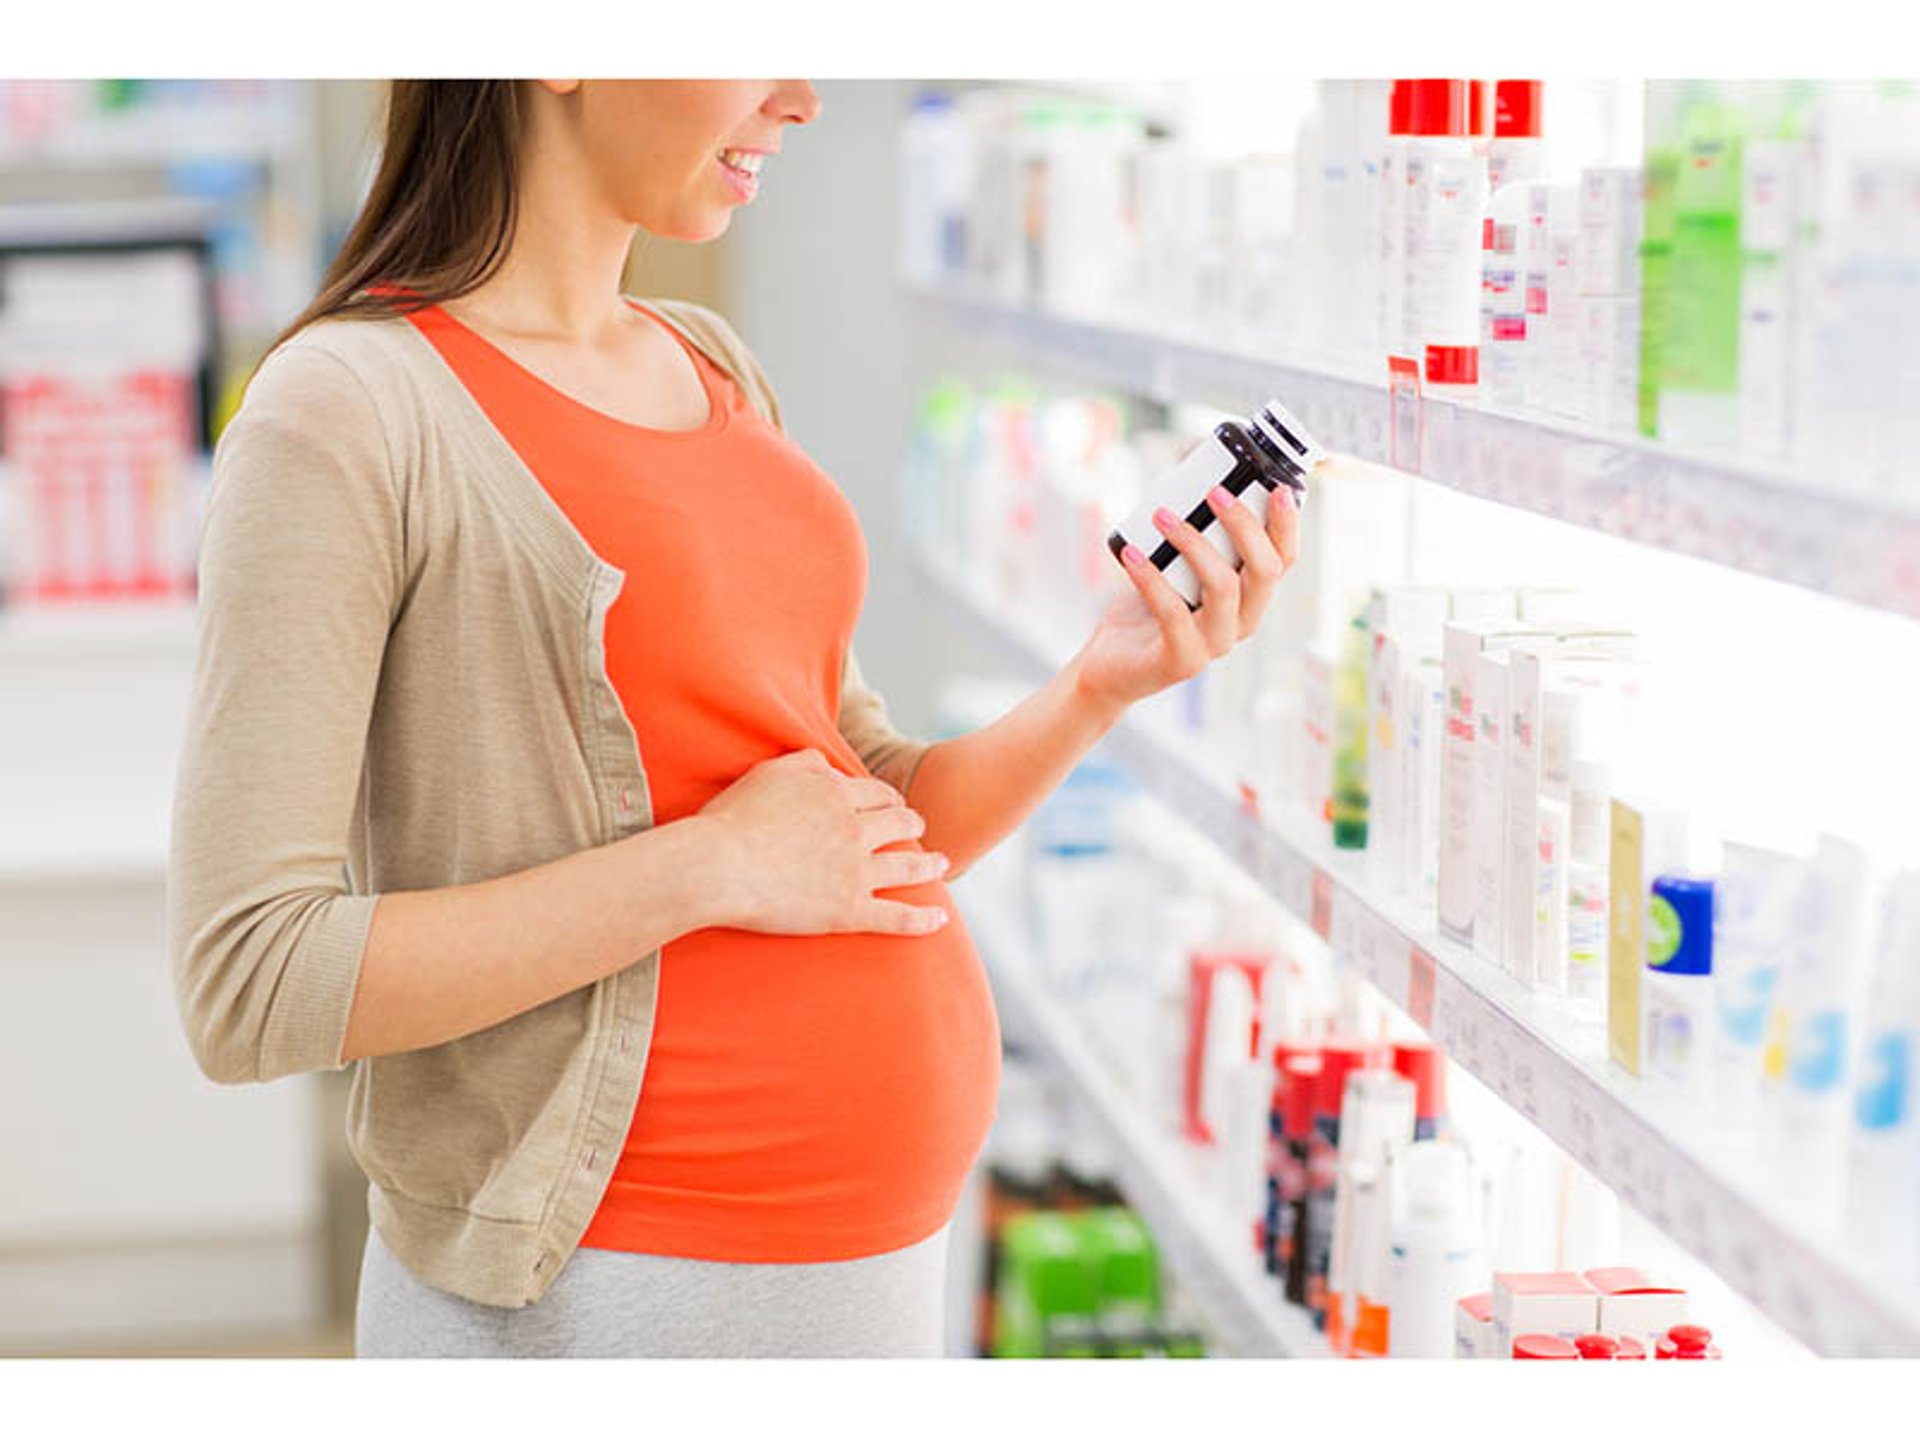 Epilepsy Meds During Pregnancy May Raise Autism Risk in Child thumbnail